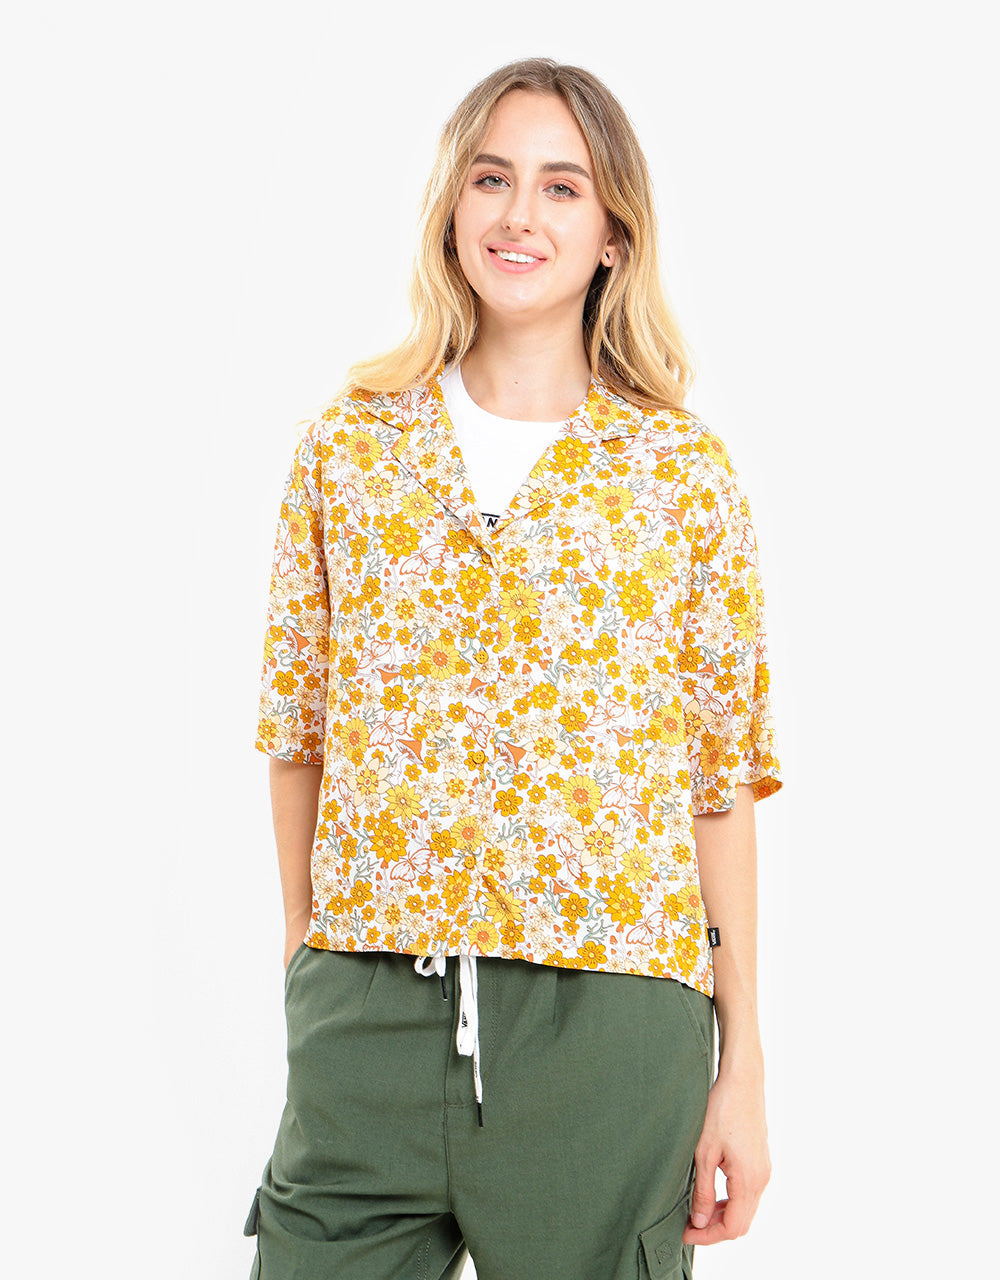 Vans Womens Trippy Floral Woven Top - Trippy Floral